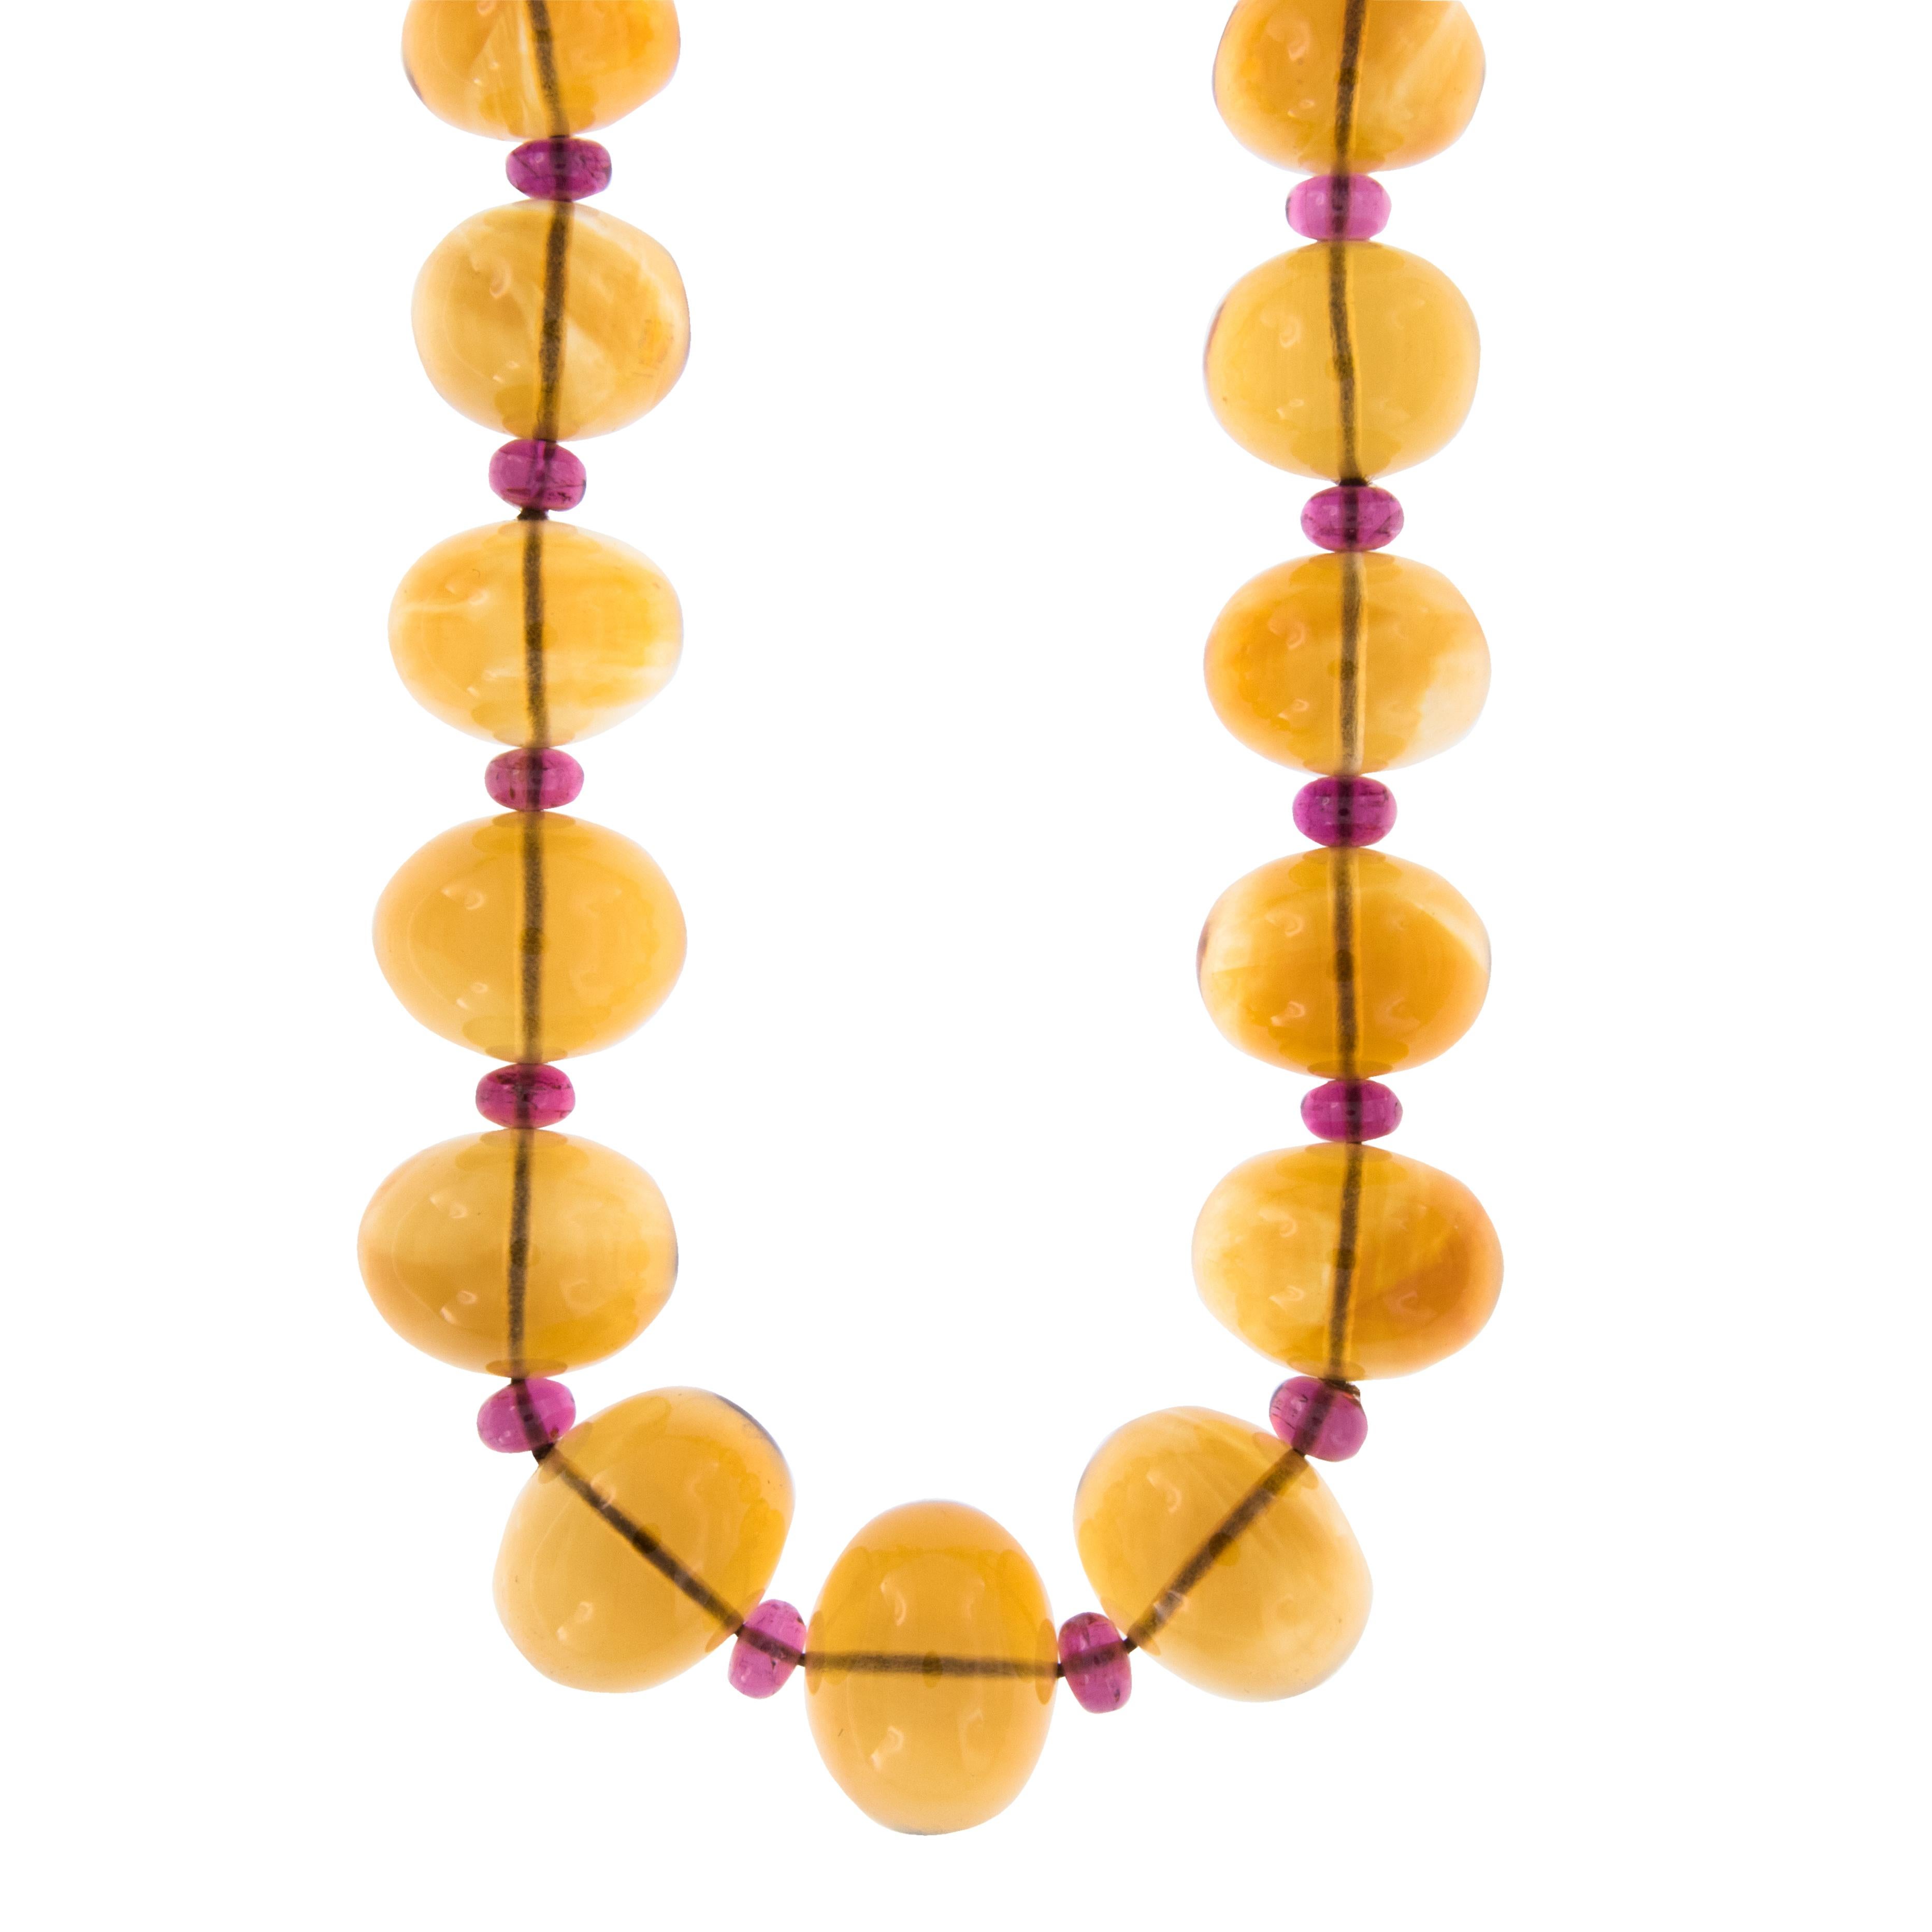 Goshwara, a term for perfect shape, is a company known for exceptional color gems and this 18 karat yellow gold Beyond beaded necklace features 418 Cttw. citrines,  & 35  Cttw. rubelites. Go beyond expectations & Go Beyond limits with this precious